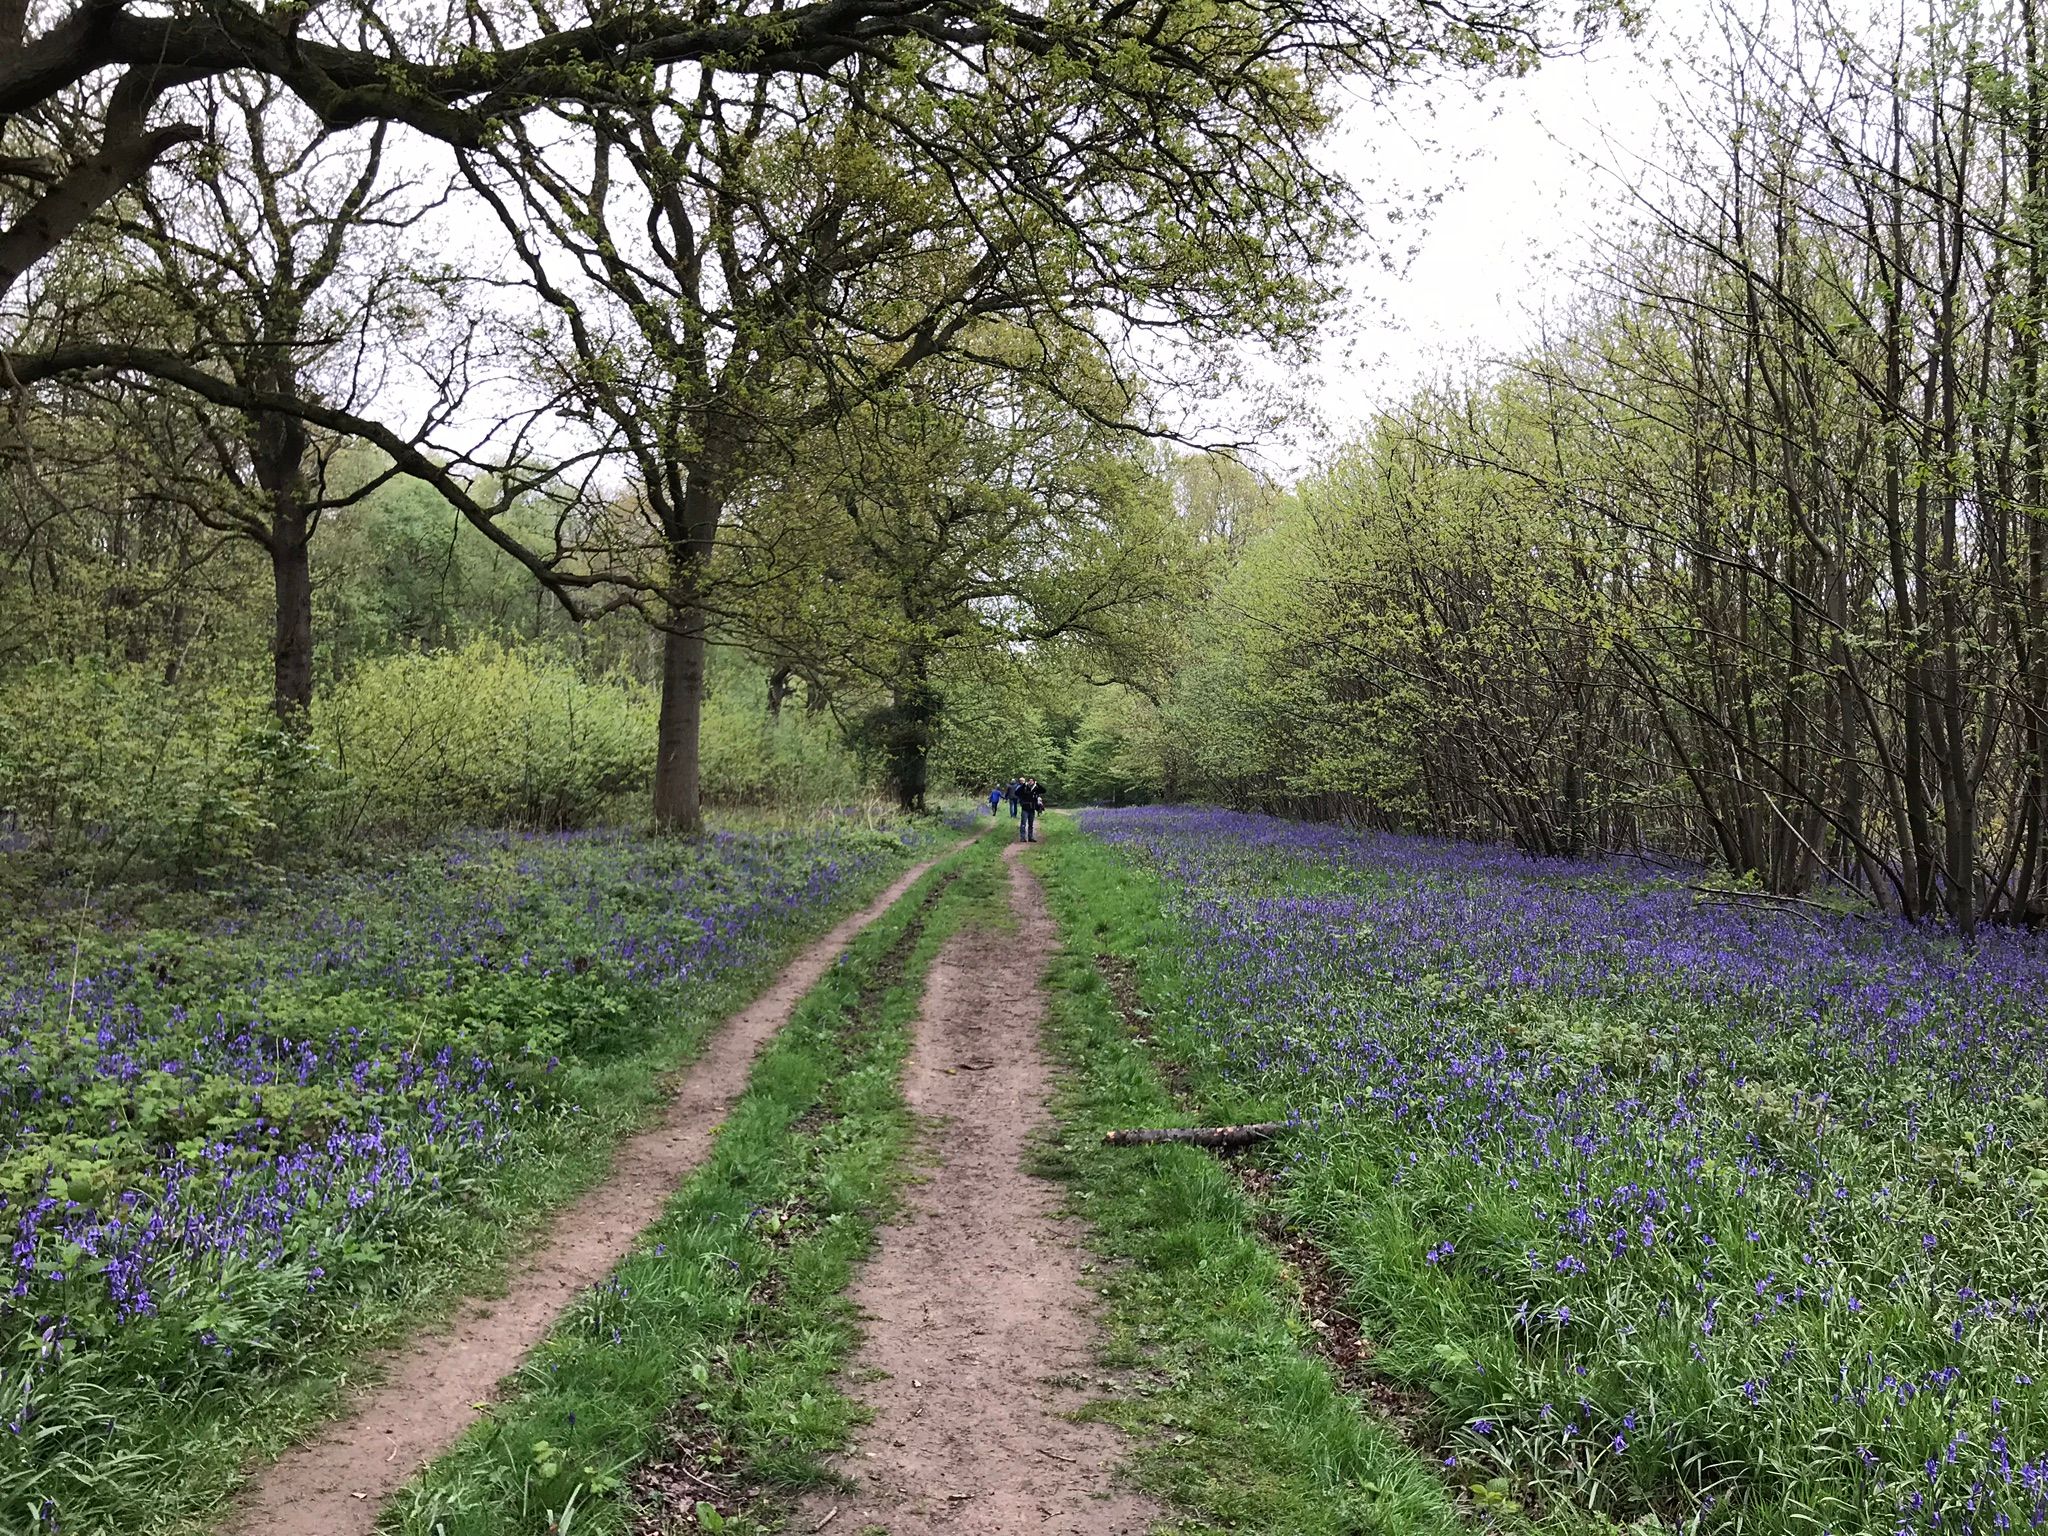 Bluebell woodland and paths